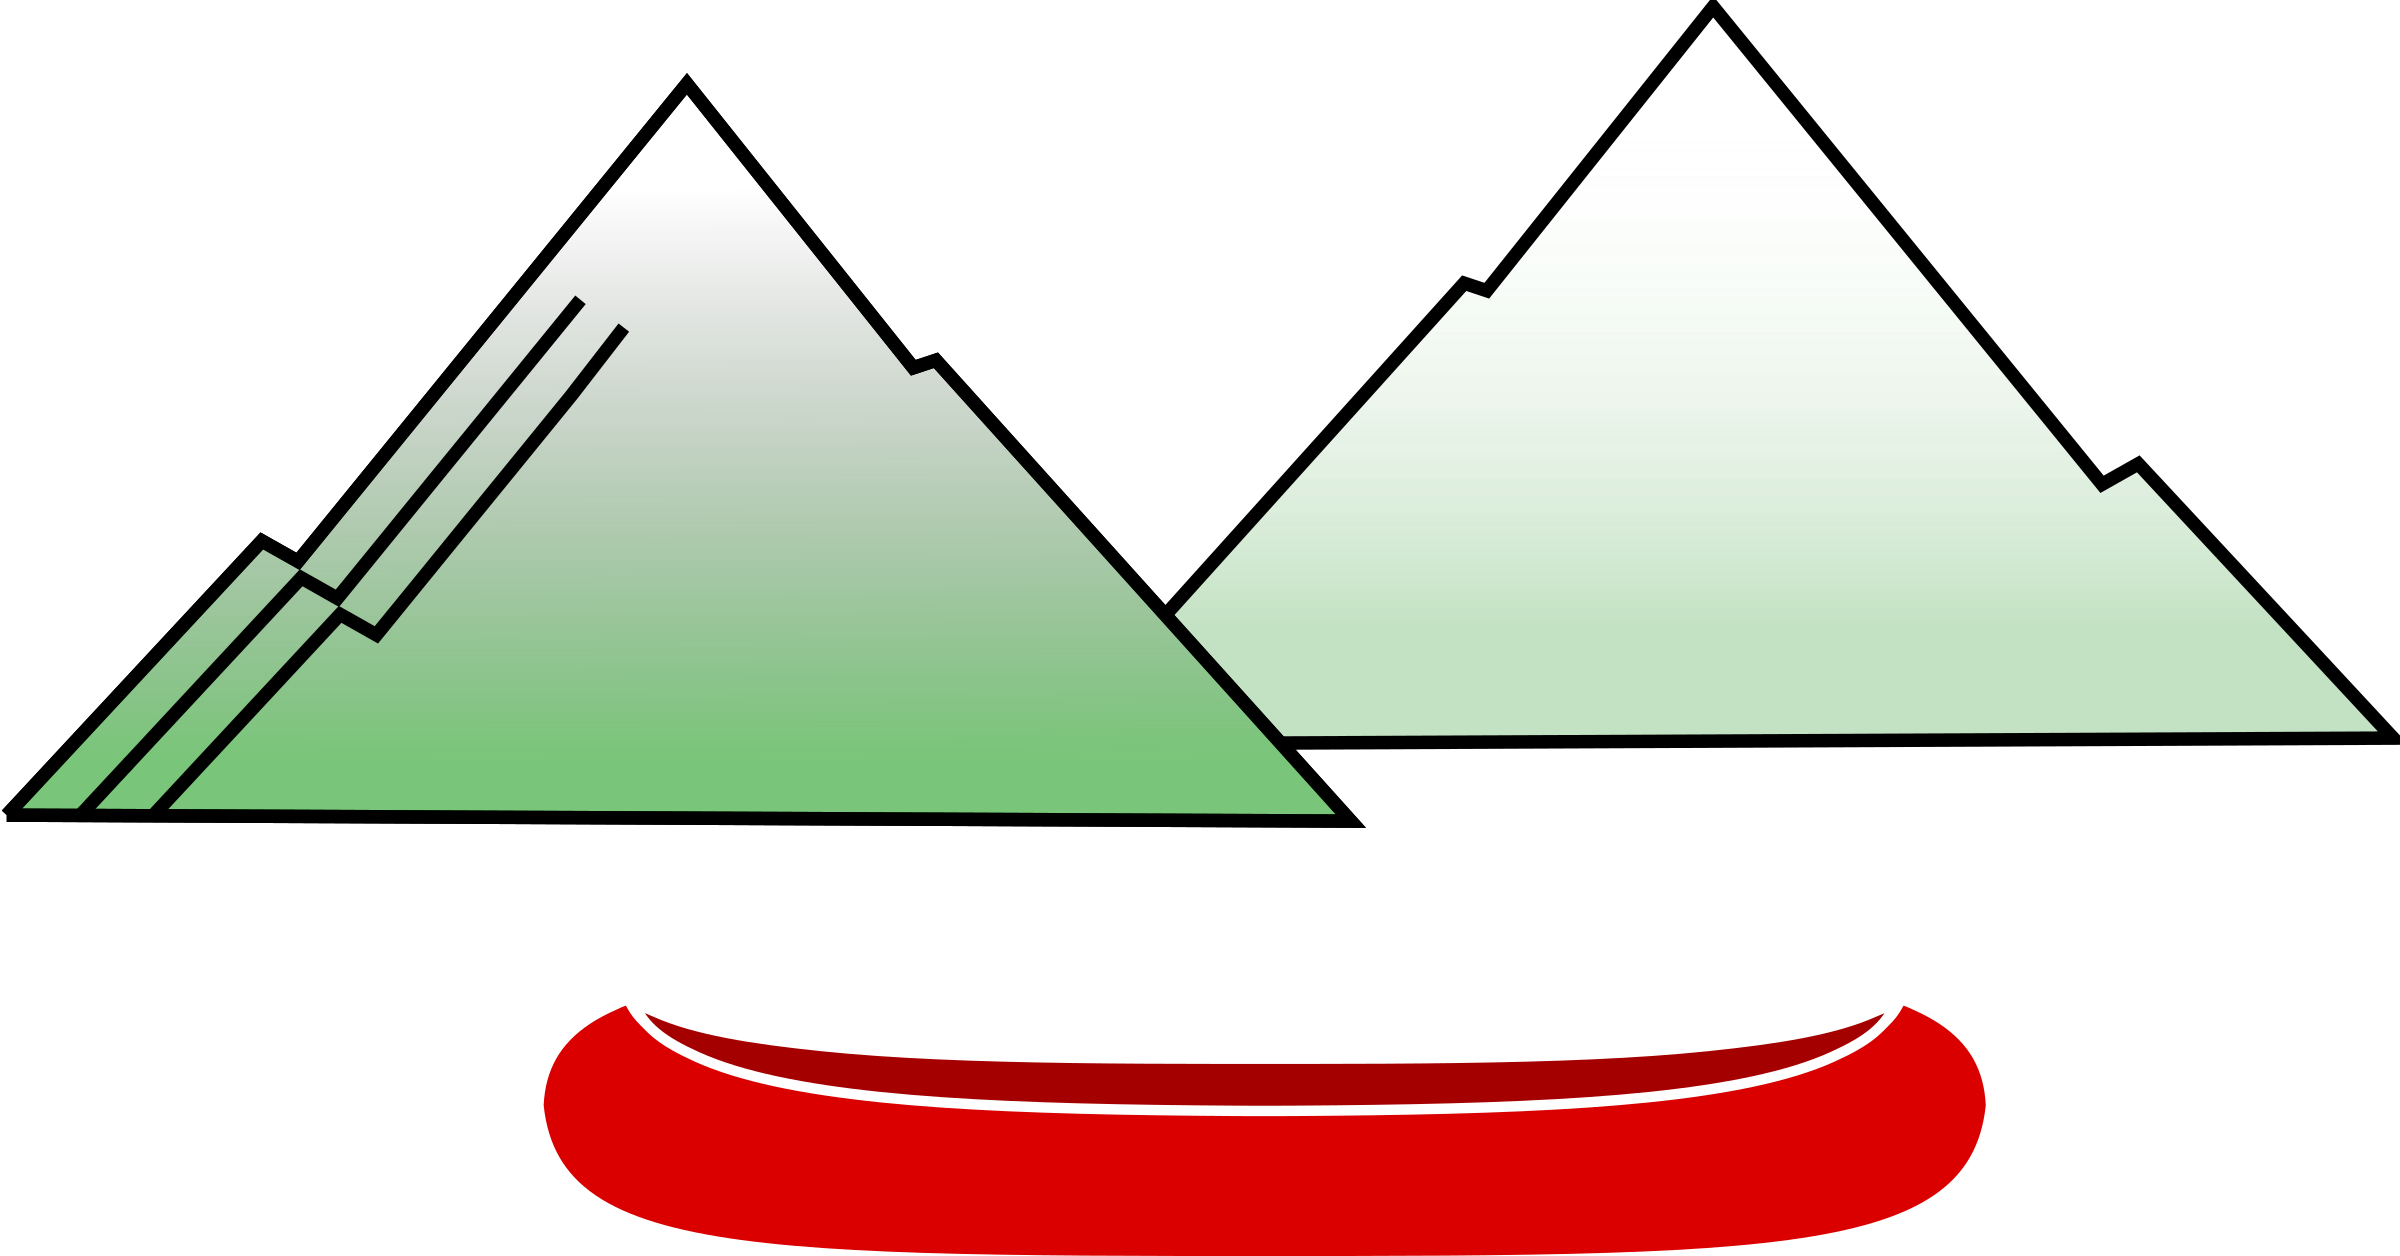 This Free Icons Png Design Of Canoe With Mountains - Canoe In Mountains Clipart (2400x1256)